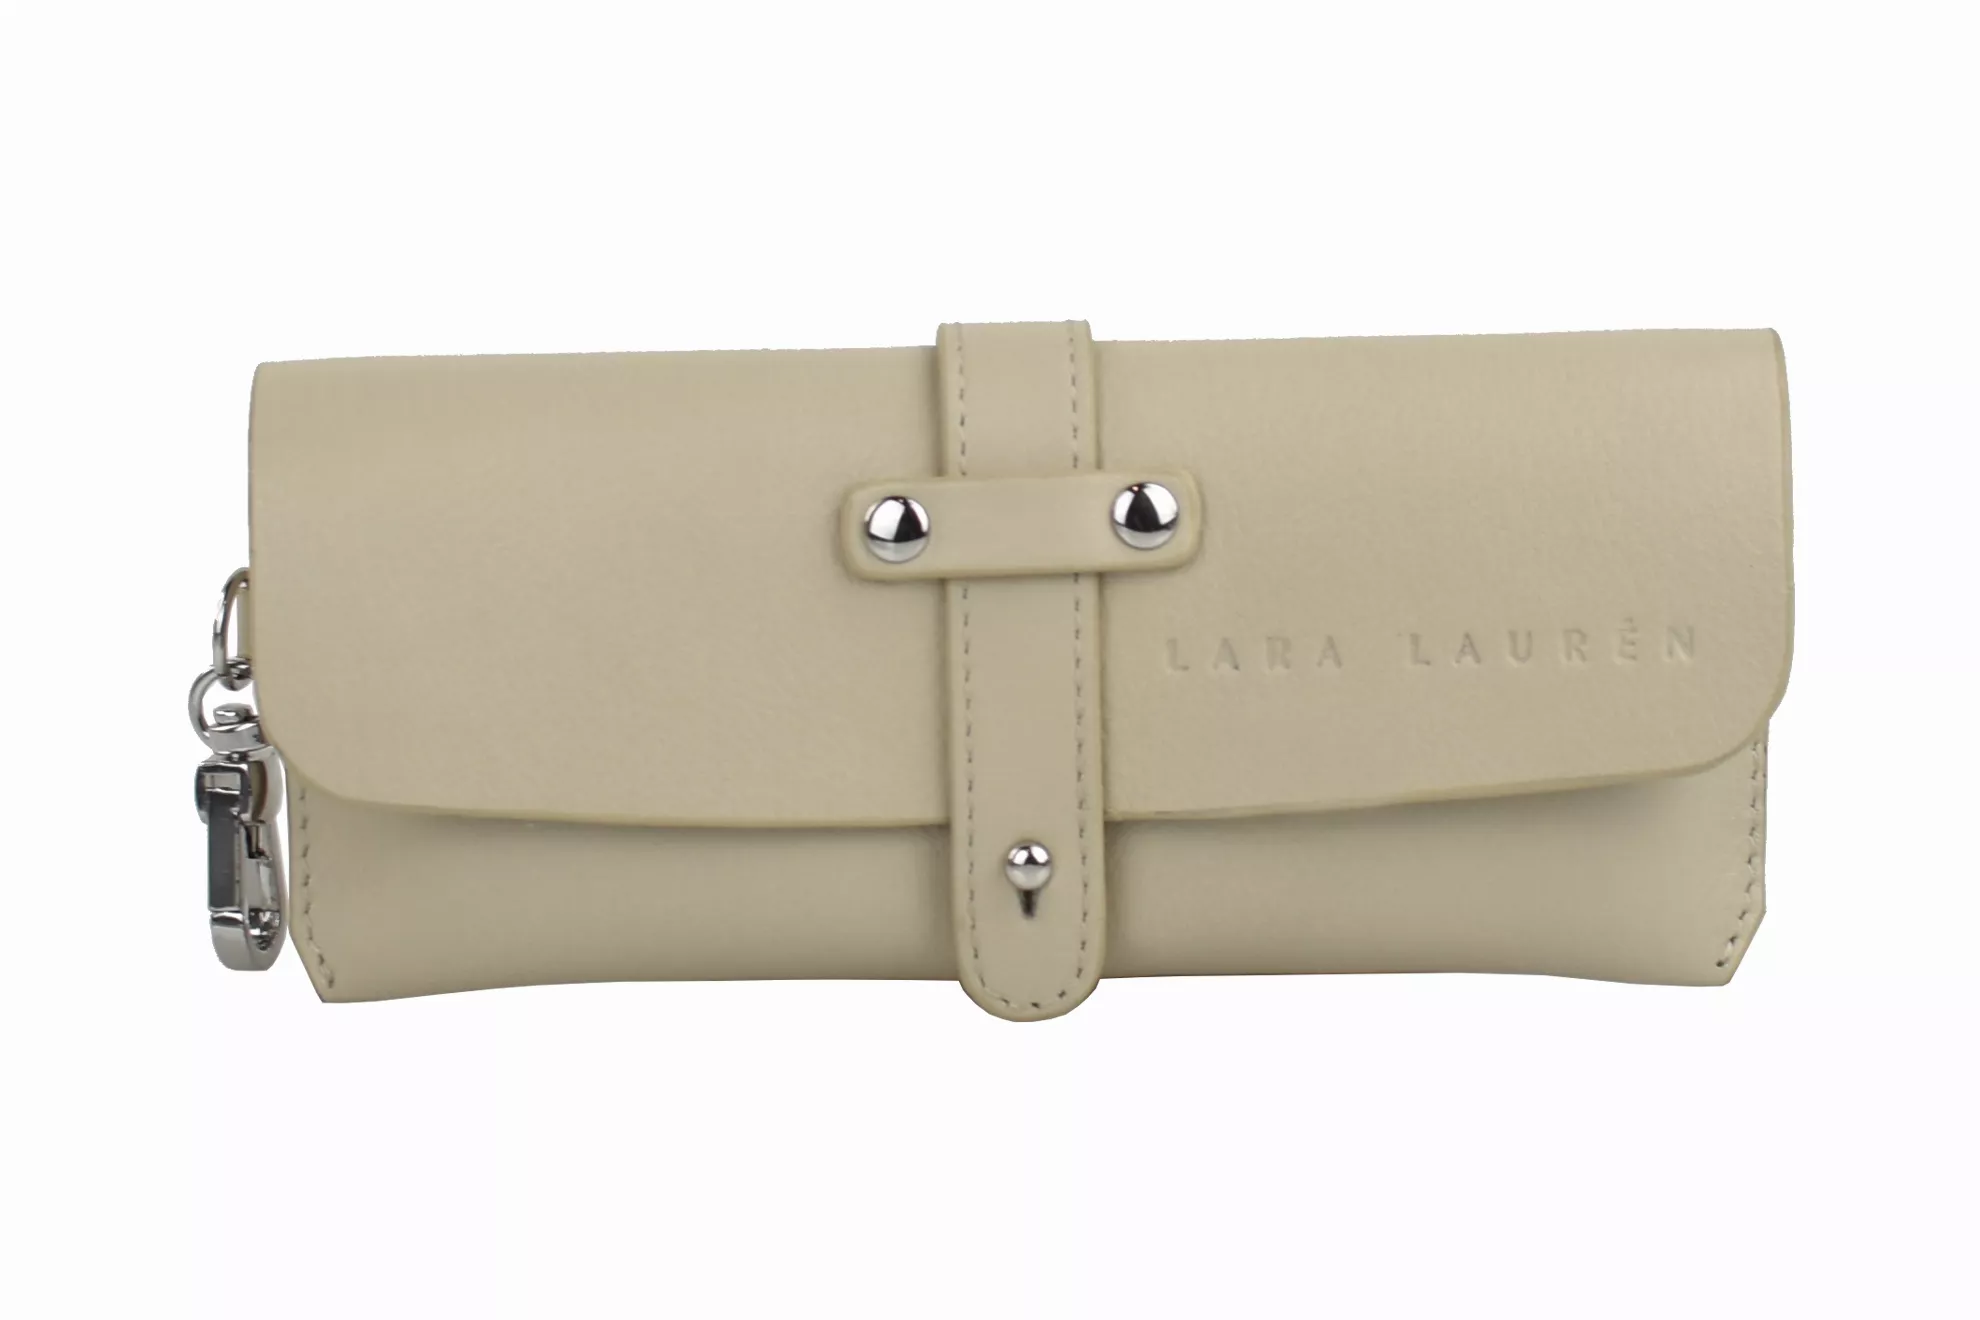 ROMY Suncover / Glases Case, creme